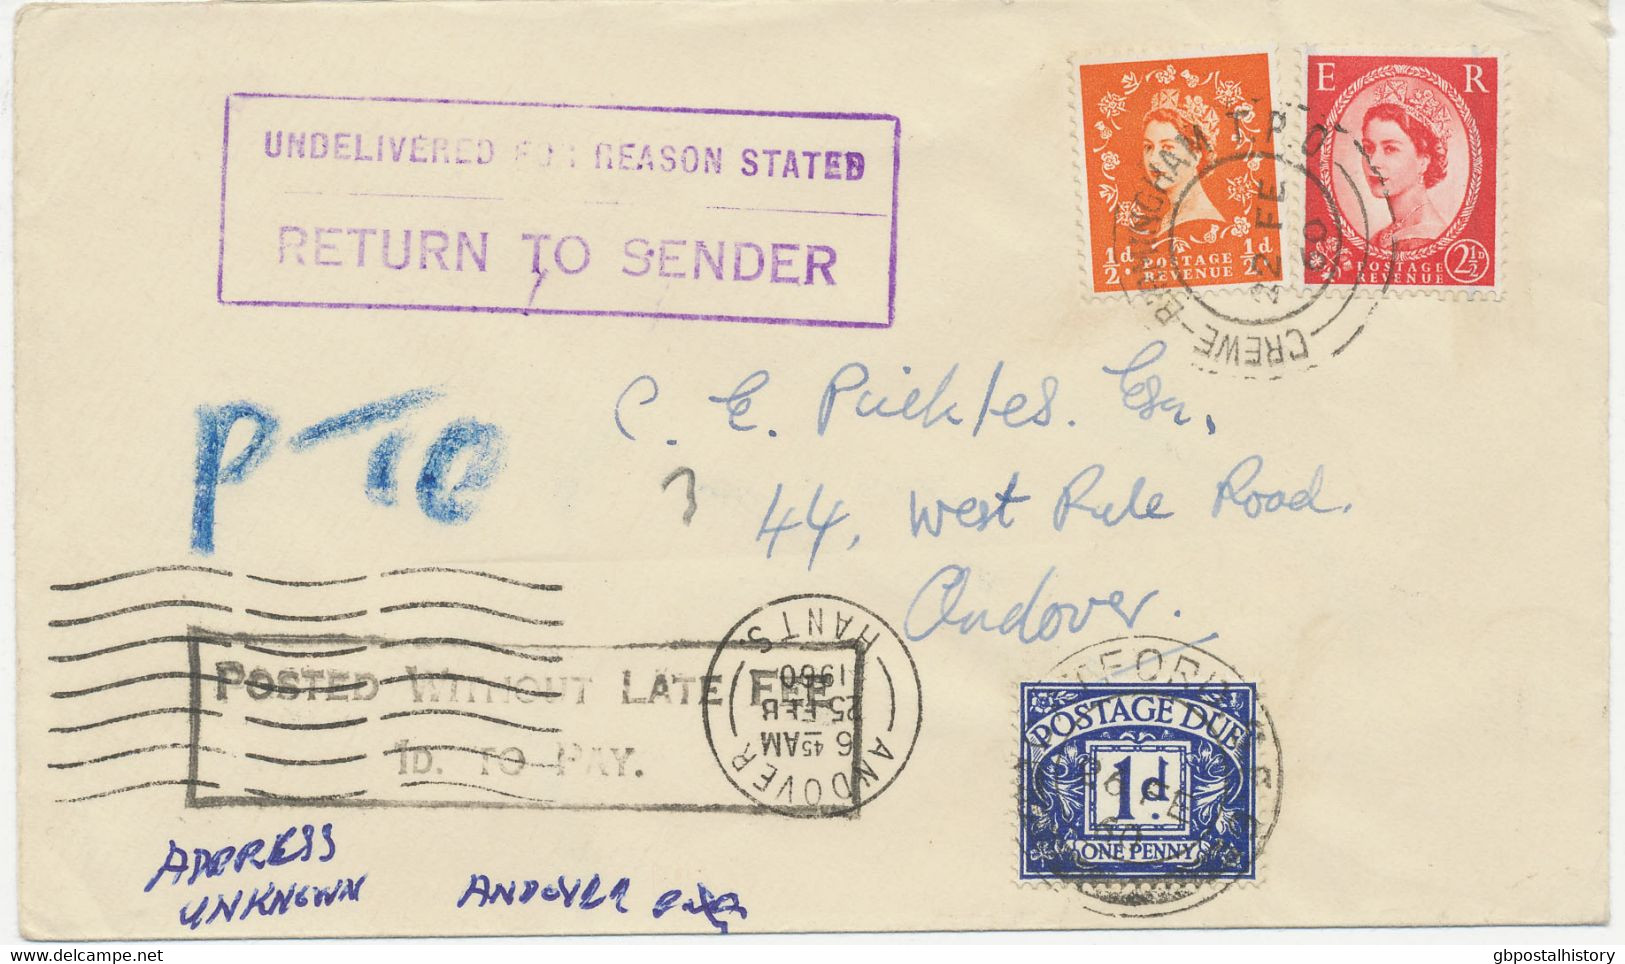 GB 1960 QEII 1/2d And 2 1/2d As Well As Postage Due 1d On Very Fine Rare Cover W. Railway-K2 "CREWE - BIRMINGHAM T.P.O." - Lettres & Documents